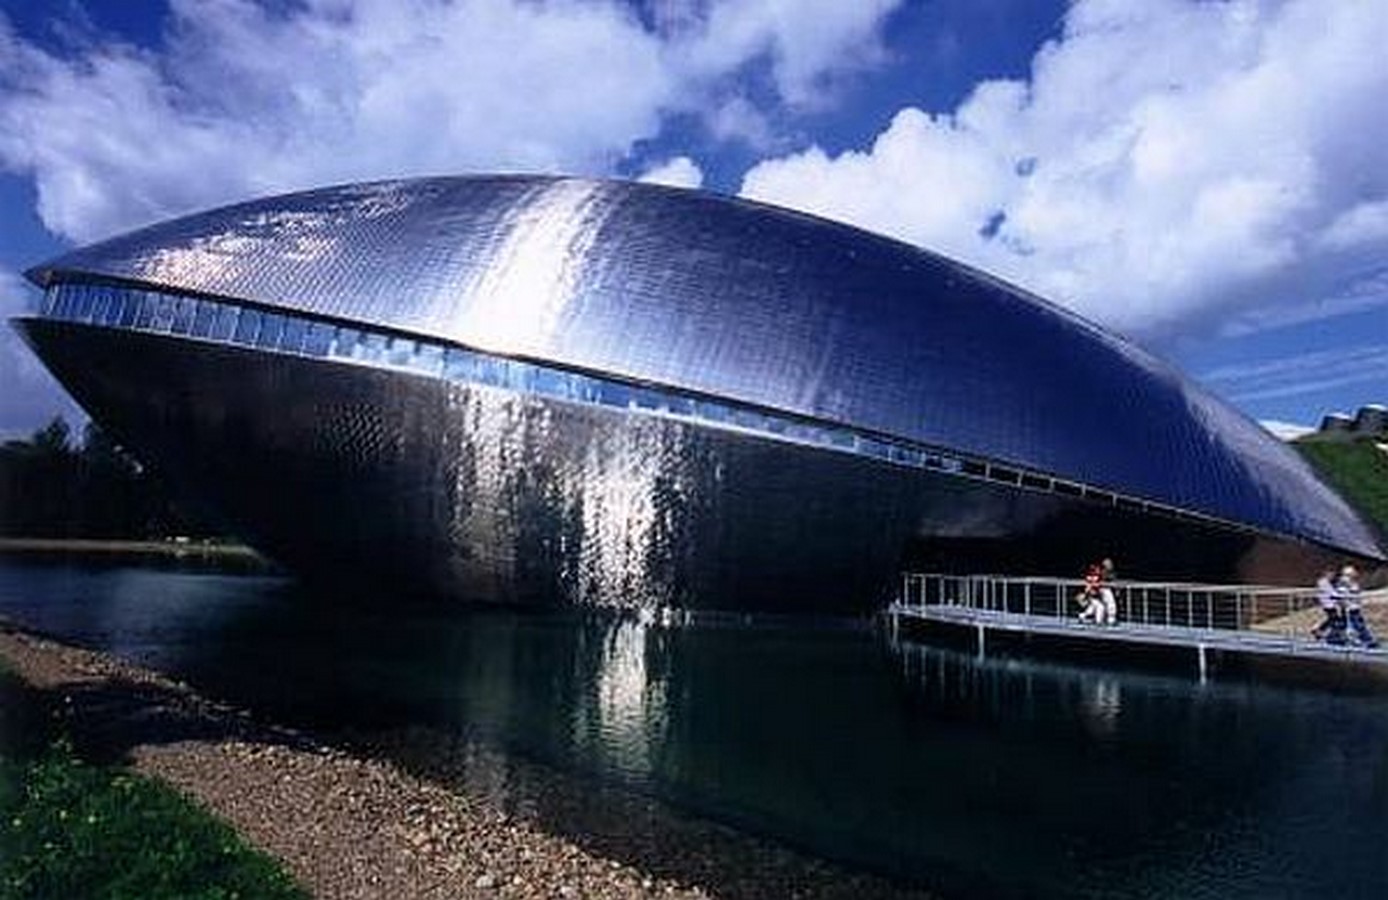 The Universum science center museum in Germany